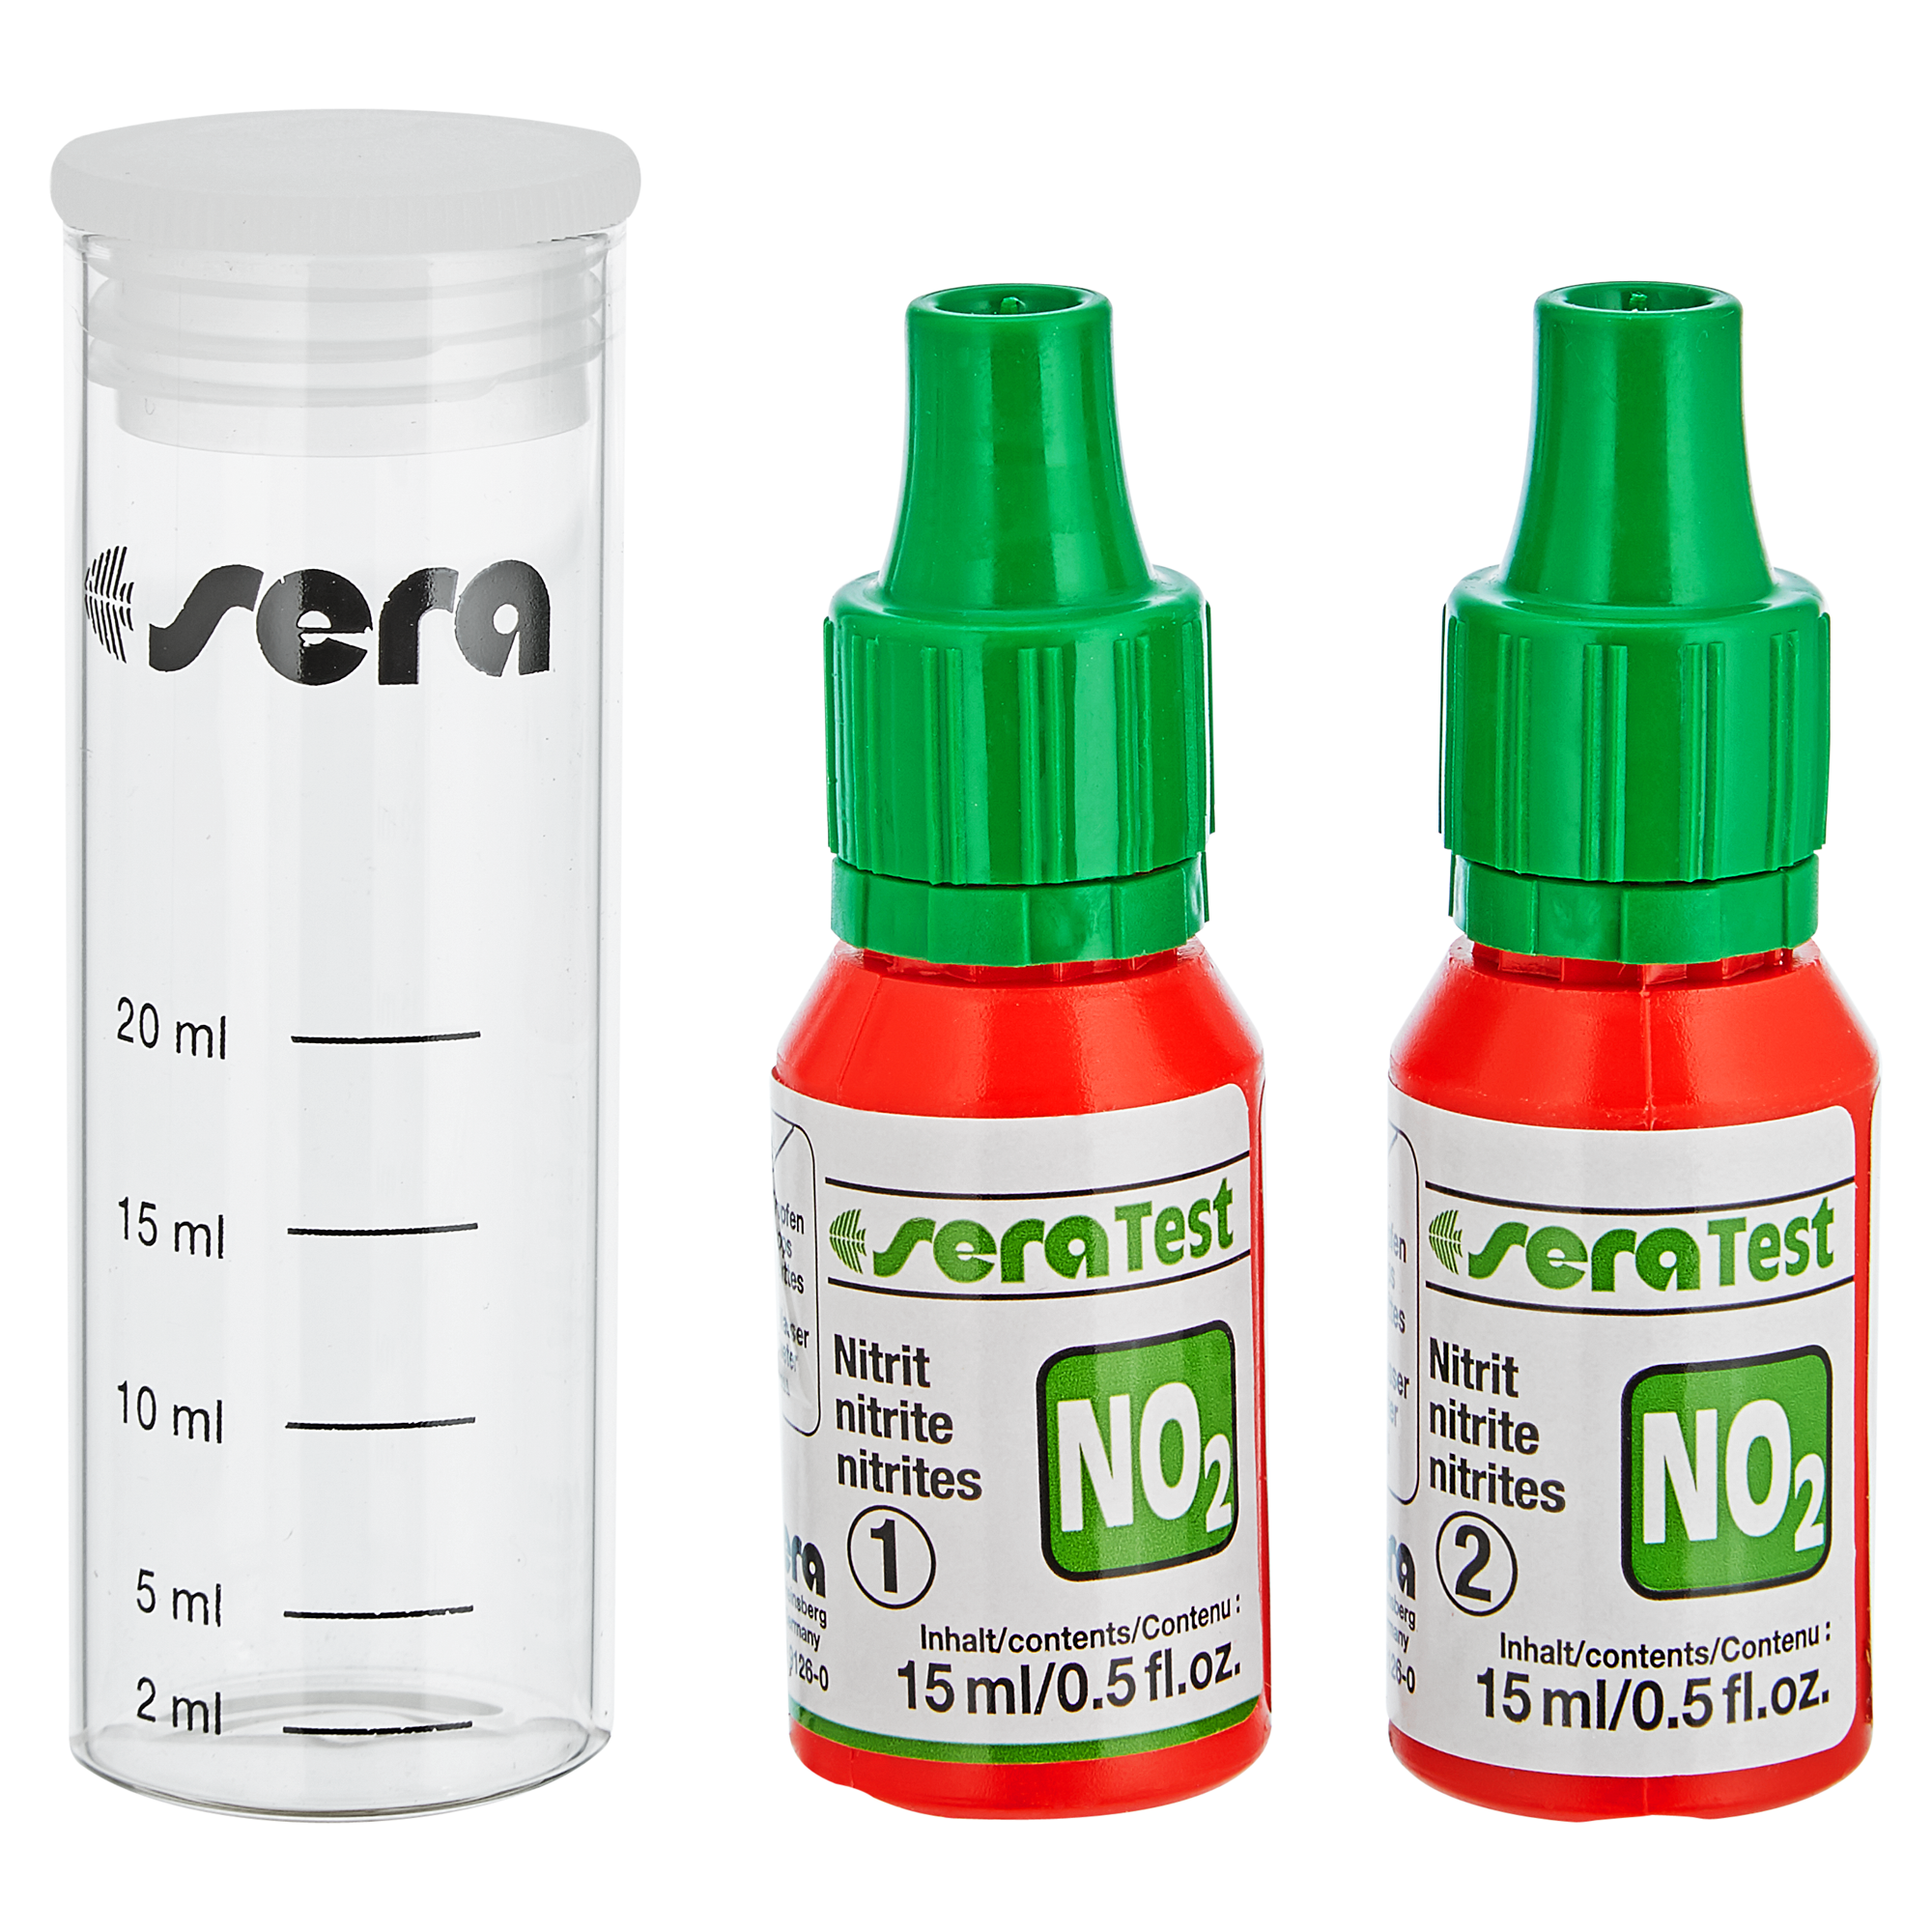 Wassertest 2 x 15 ml NO2 + product picture